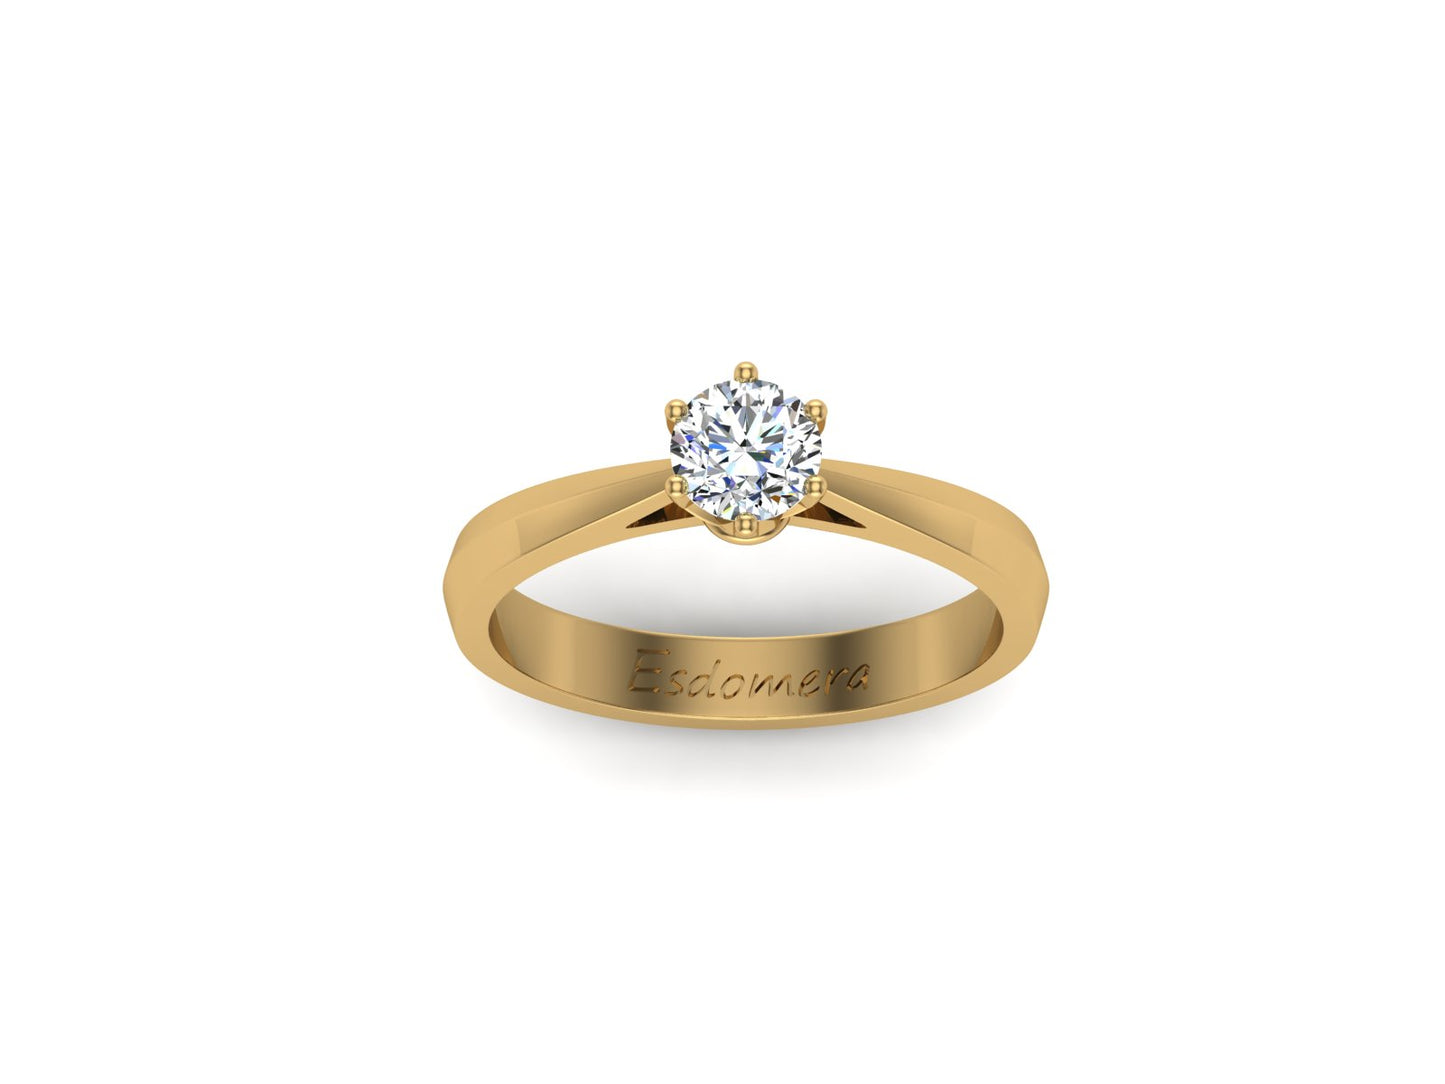 Classic 6 Prongs Round 0.5ct Moissanite Ring, Tapered Solitaire Engagement Ring